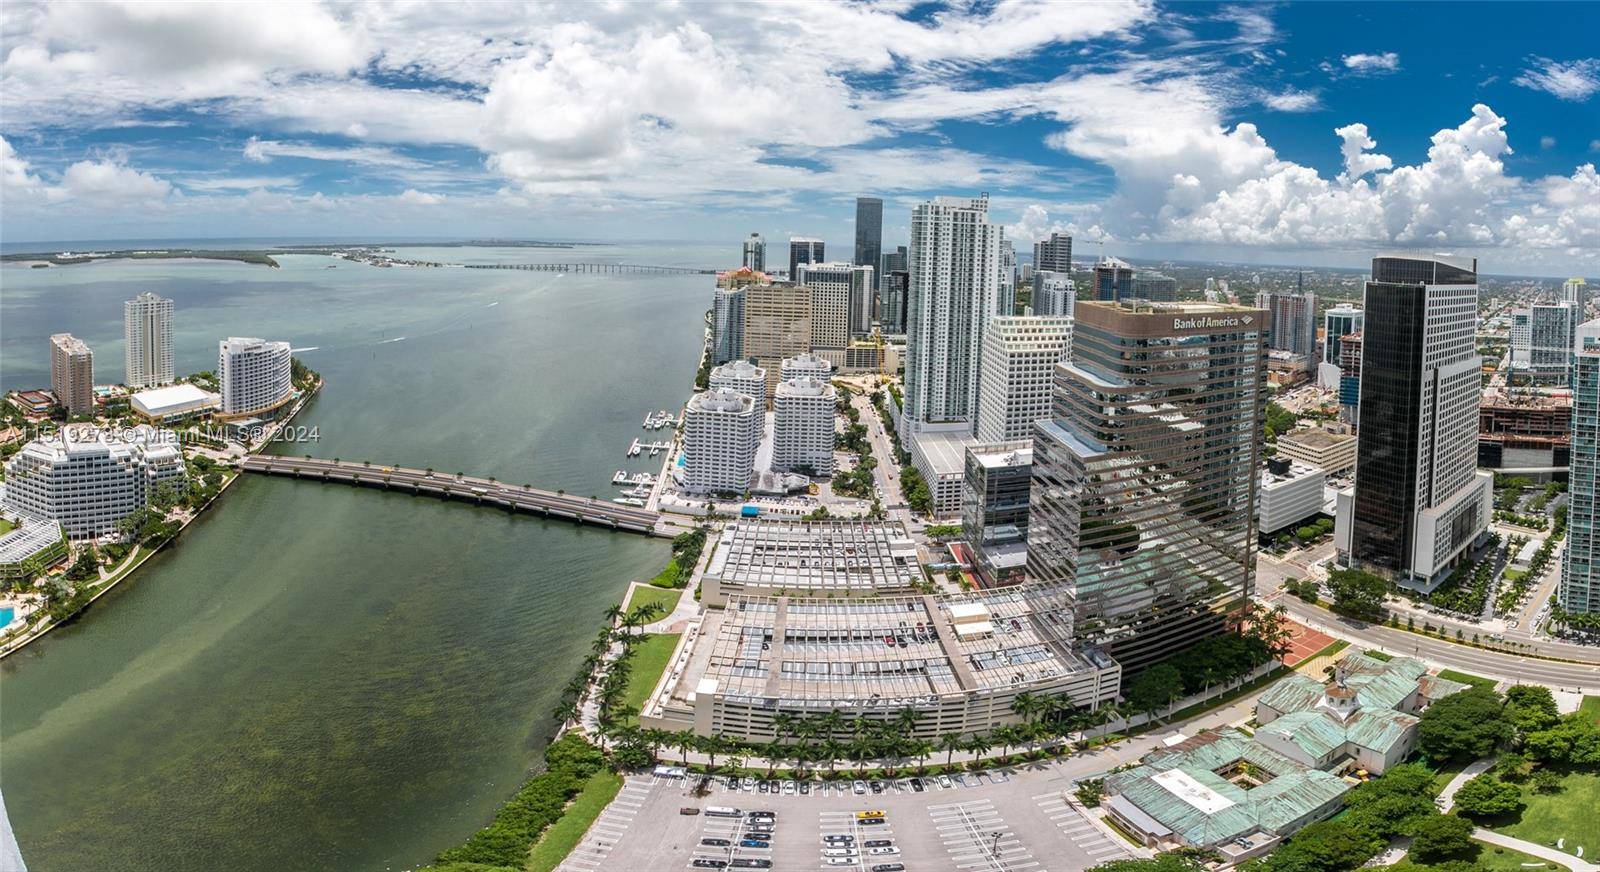 GORGEOUS 3 bed 2Bath ! at Icon Brickell Top of the line, Amazing views from 49 Floor, appliances, Amazing amenities5 Star amenities, spa, infinity pool, full gym, individual private residences ...